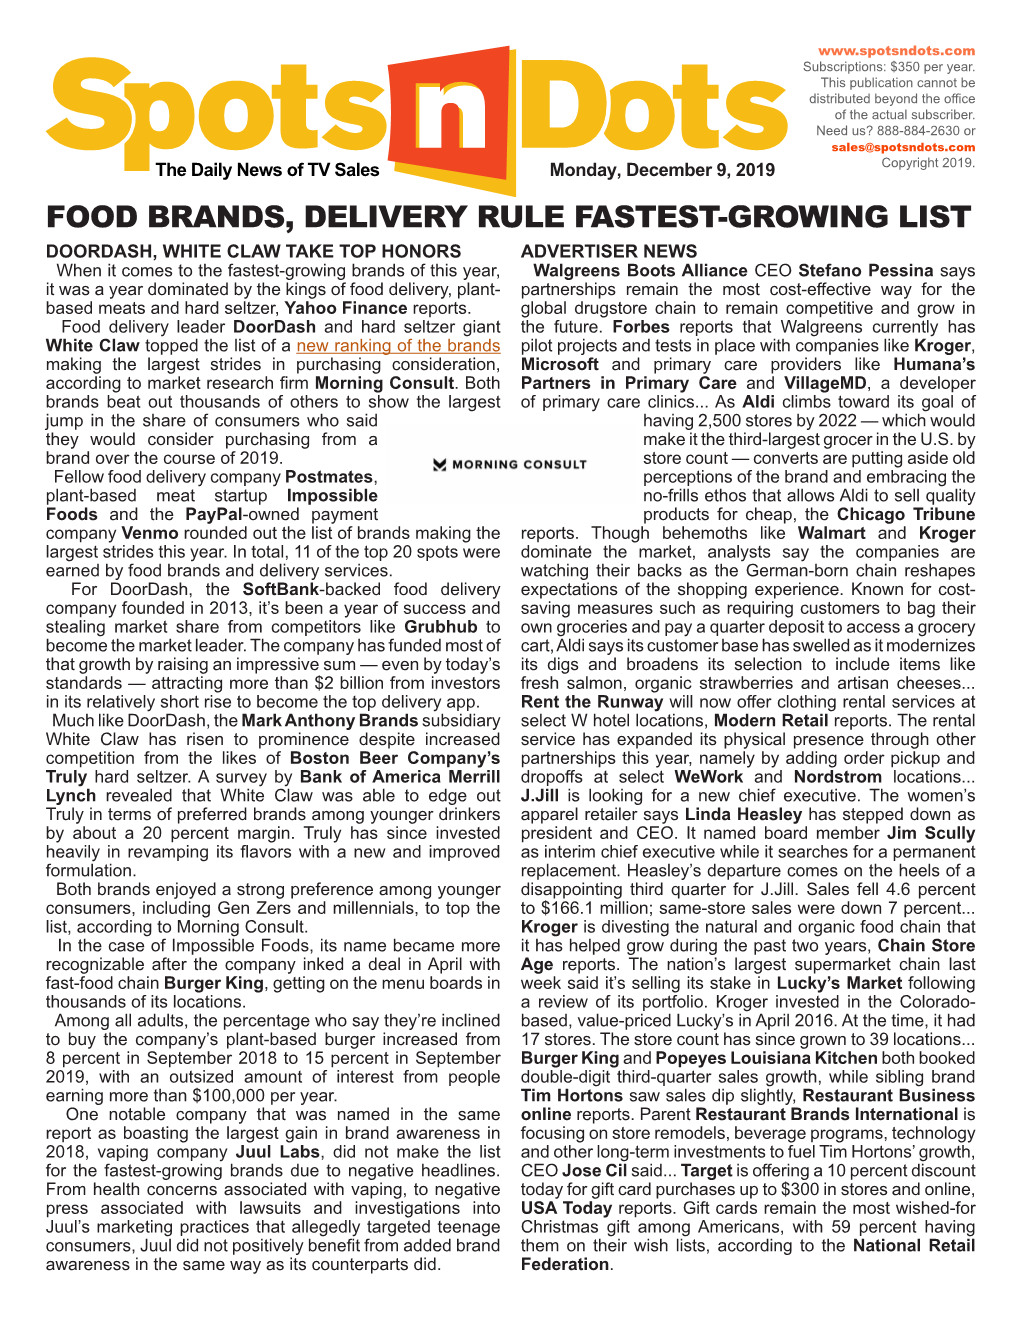 Food Brands, Delivery Rule Fastest-Growing List